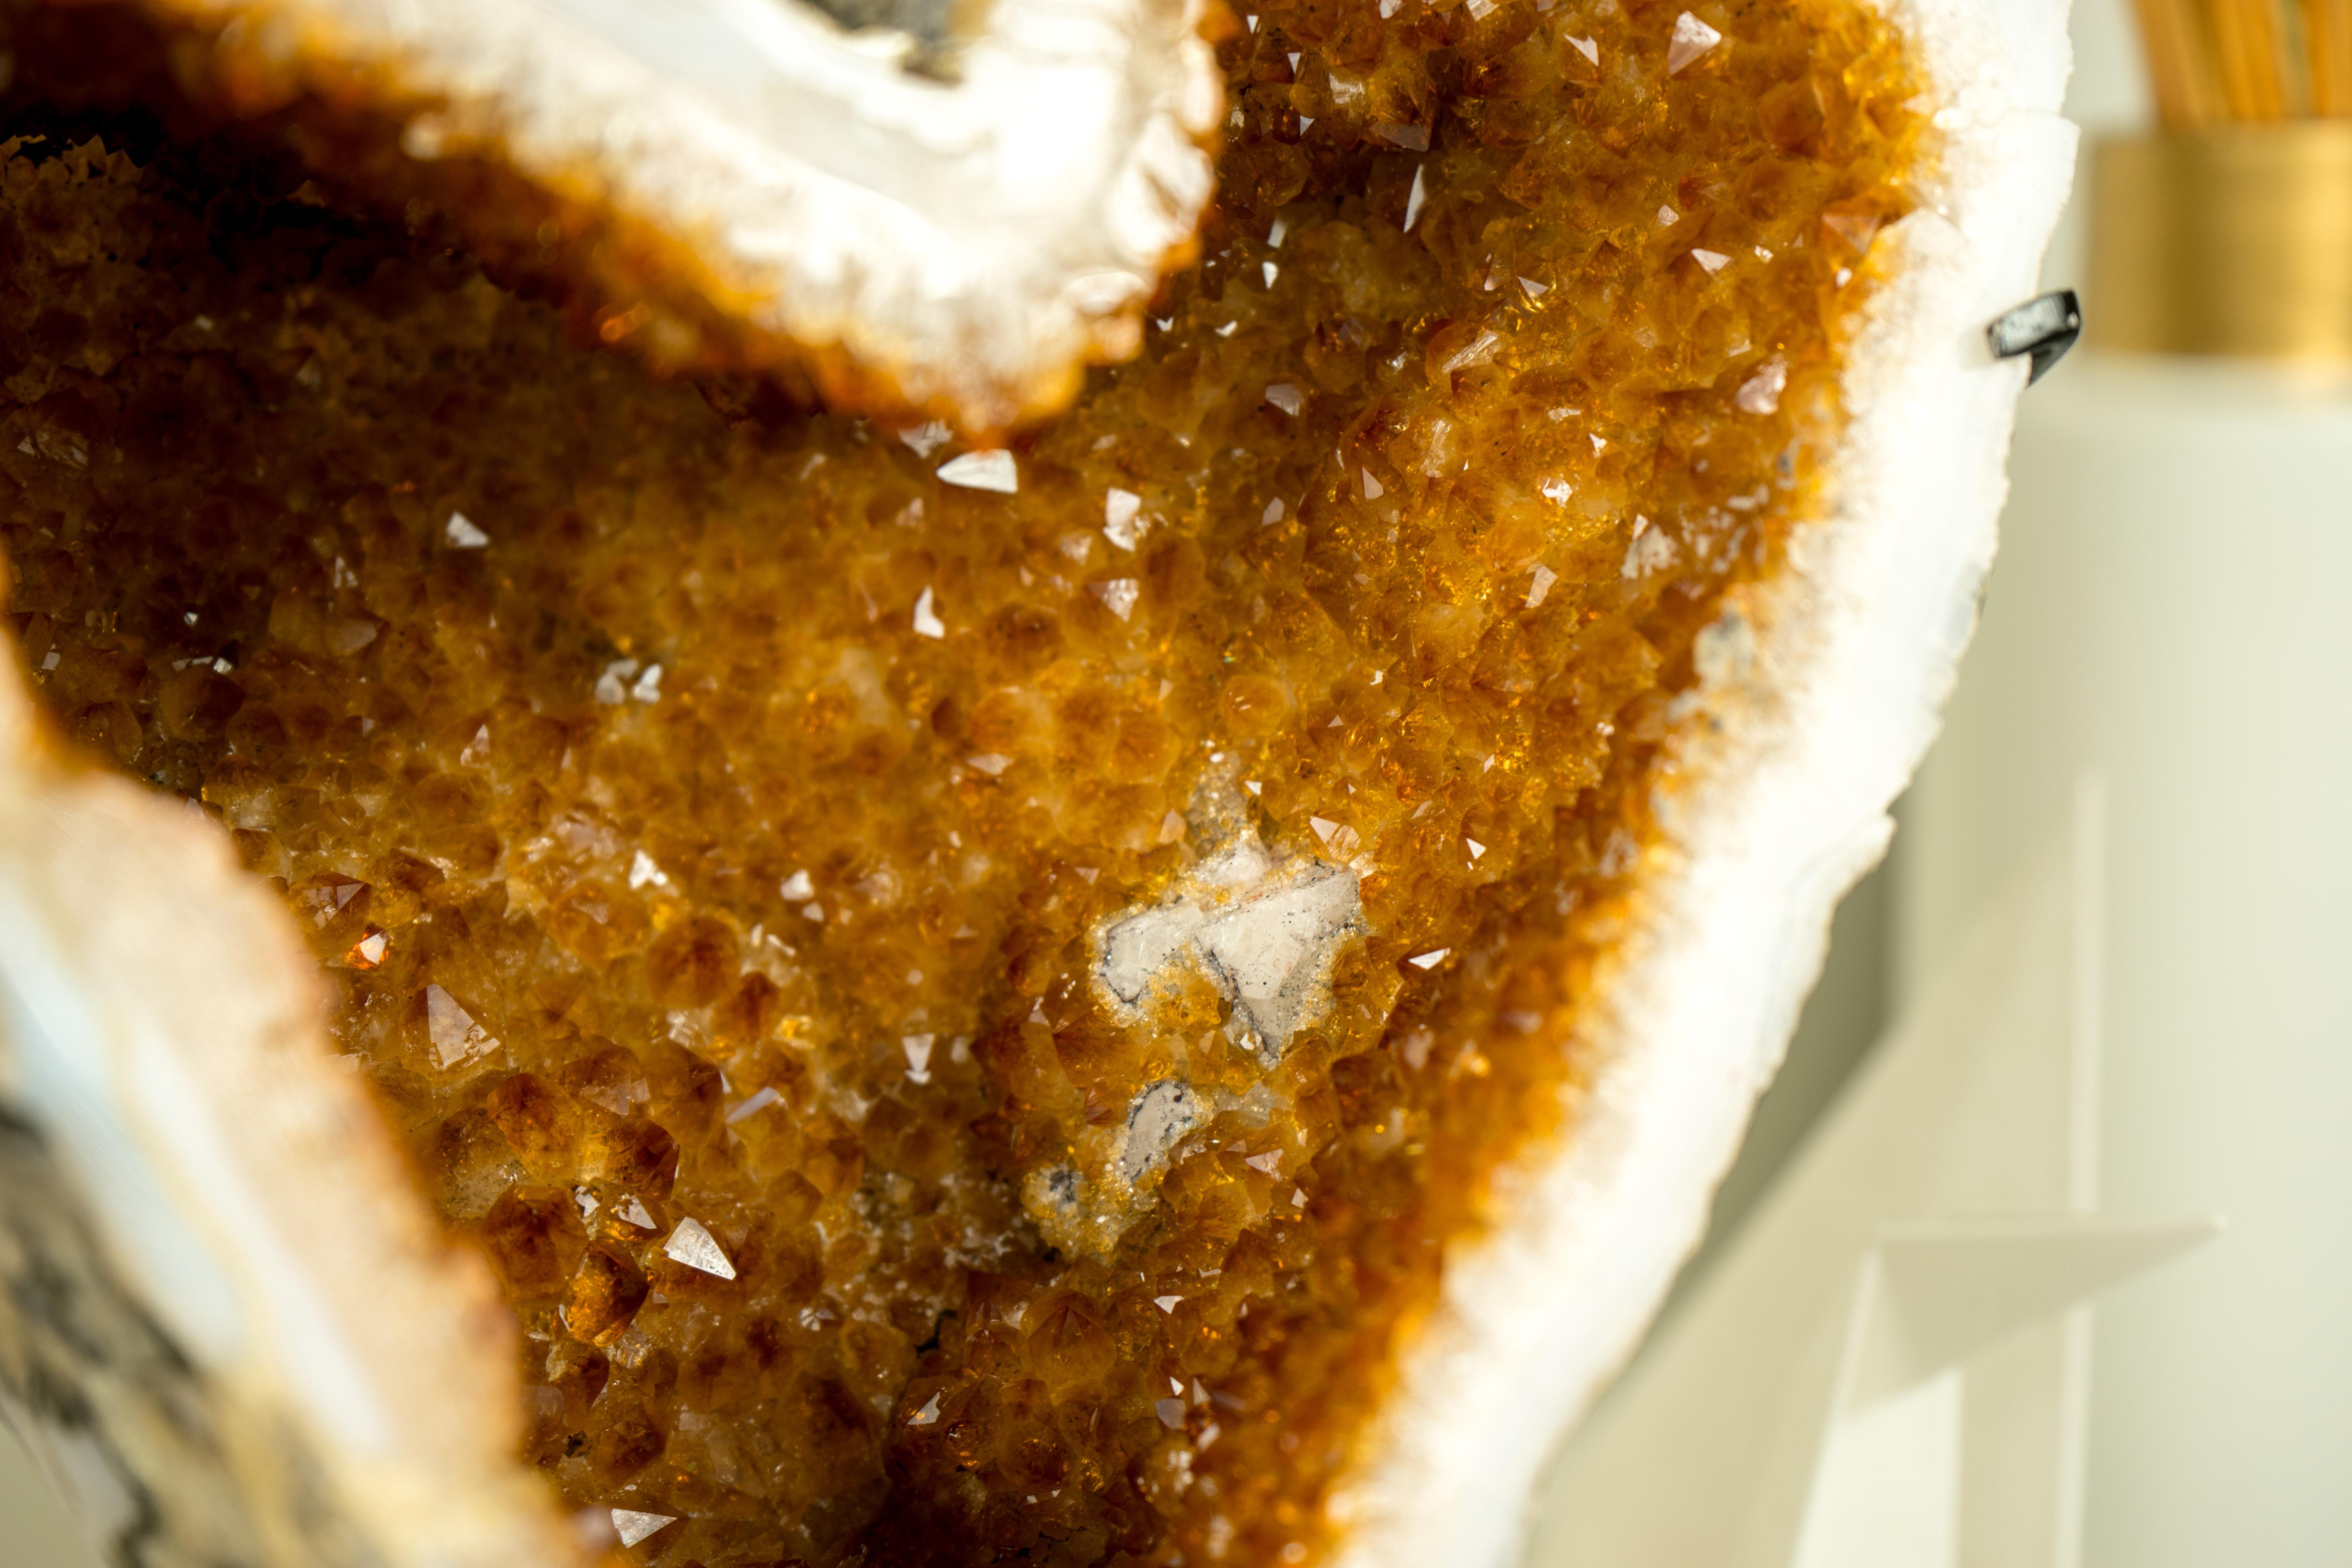 Naturally Shaped Citrine Heart Geodes with Deep Orange Citrine and White Agate 2